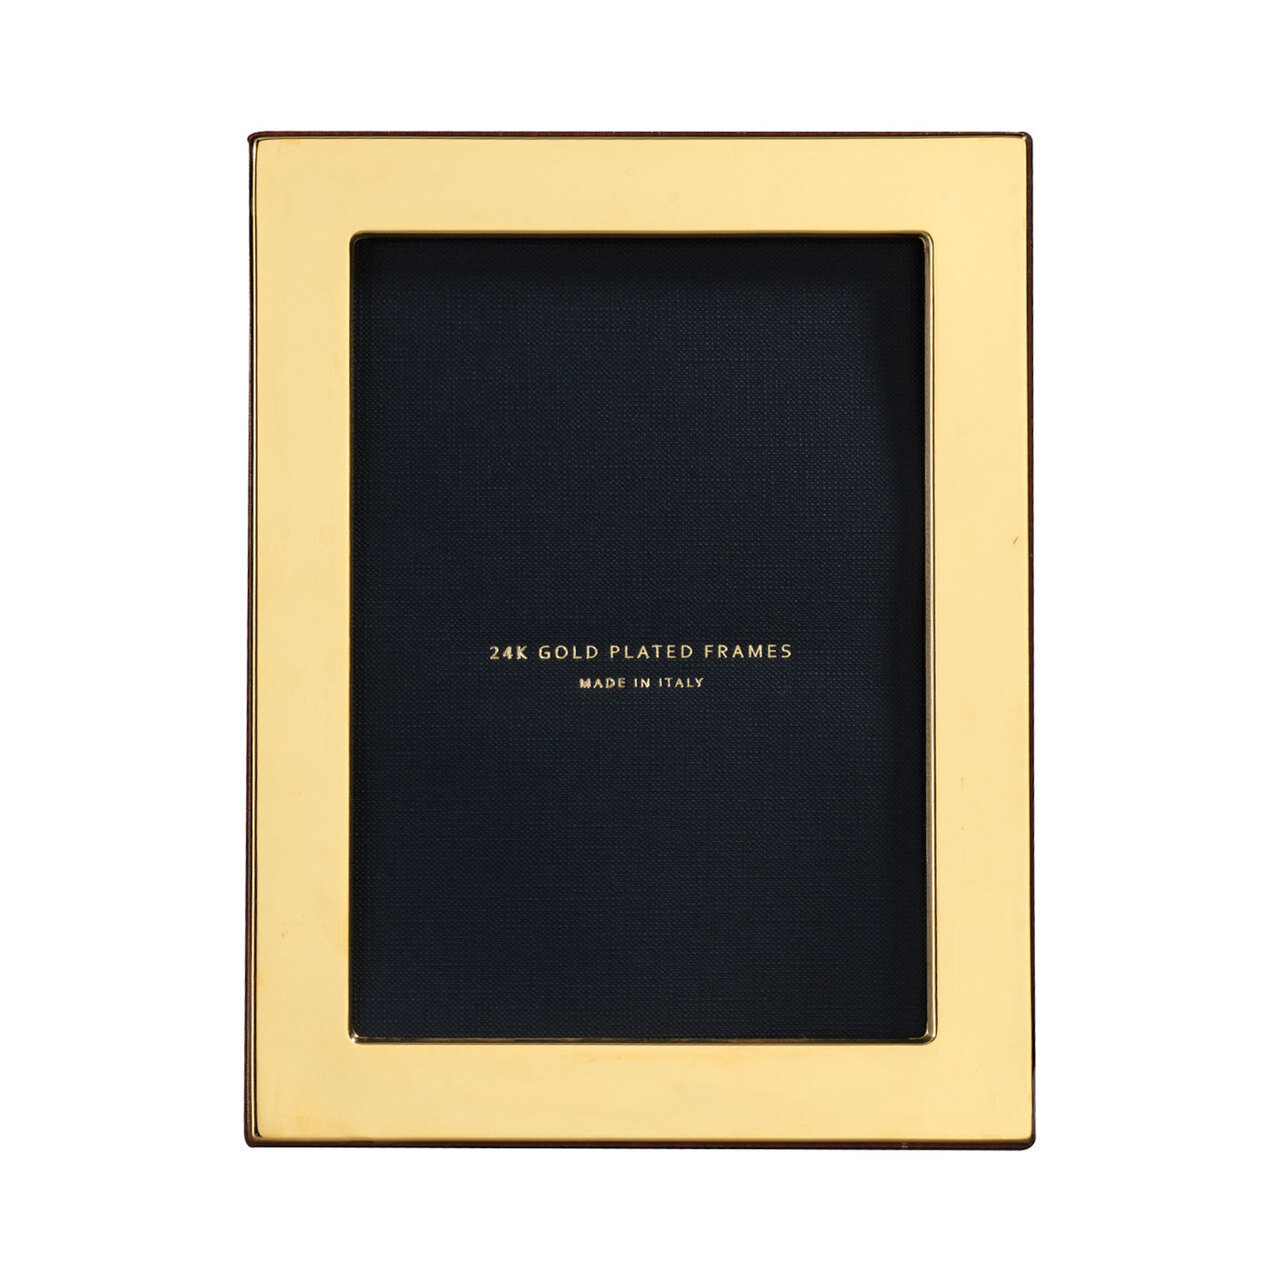 Cunill Plain 8 x 10 Inch Picture Frame - 24k Gold Plated 0.5 Microns